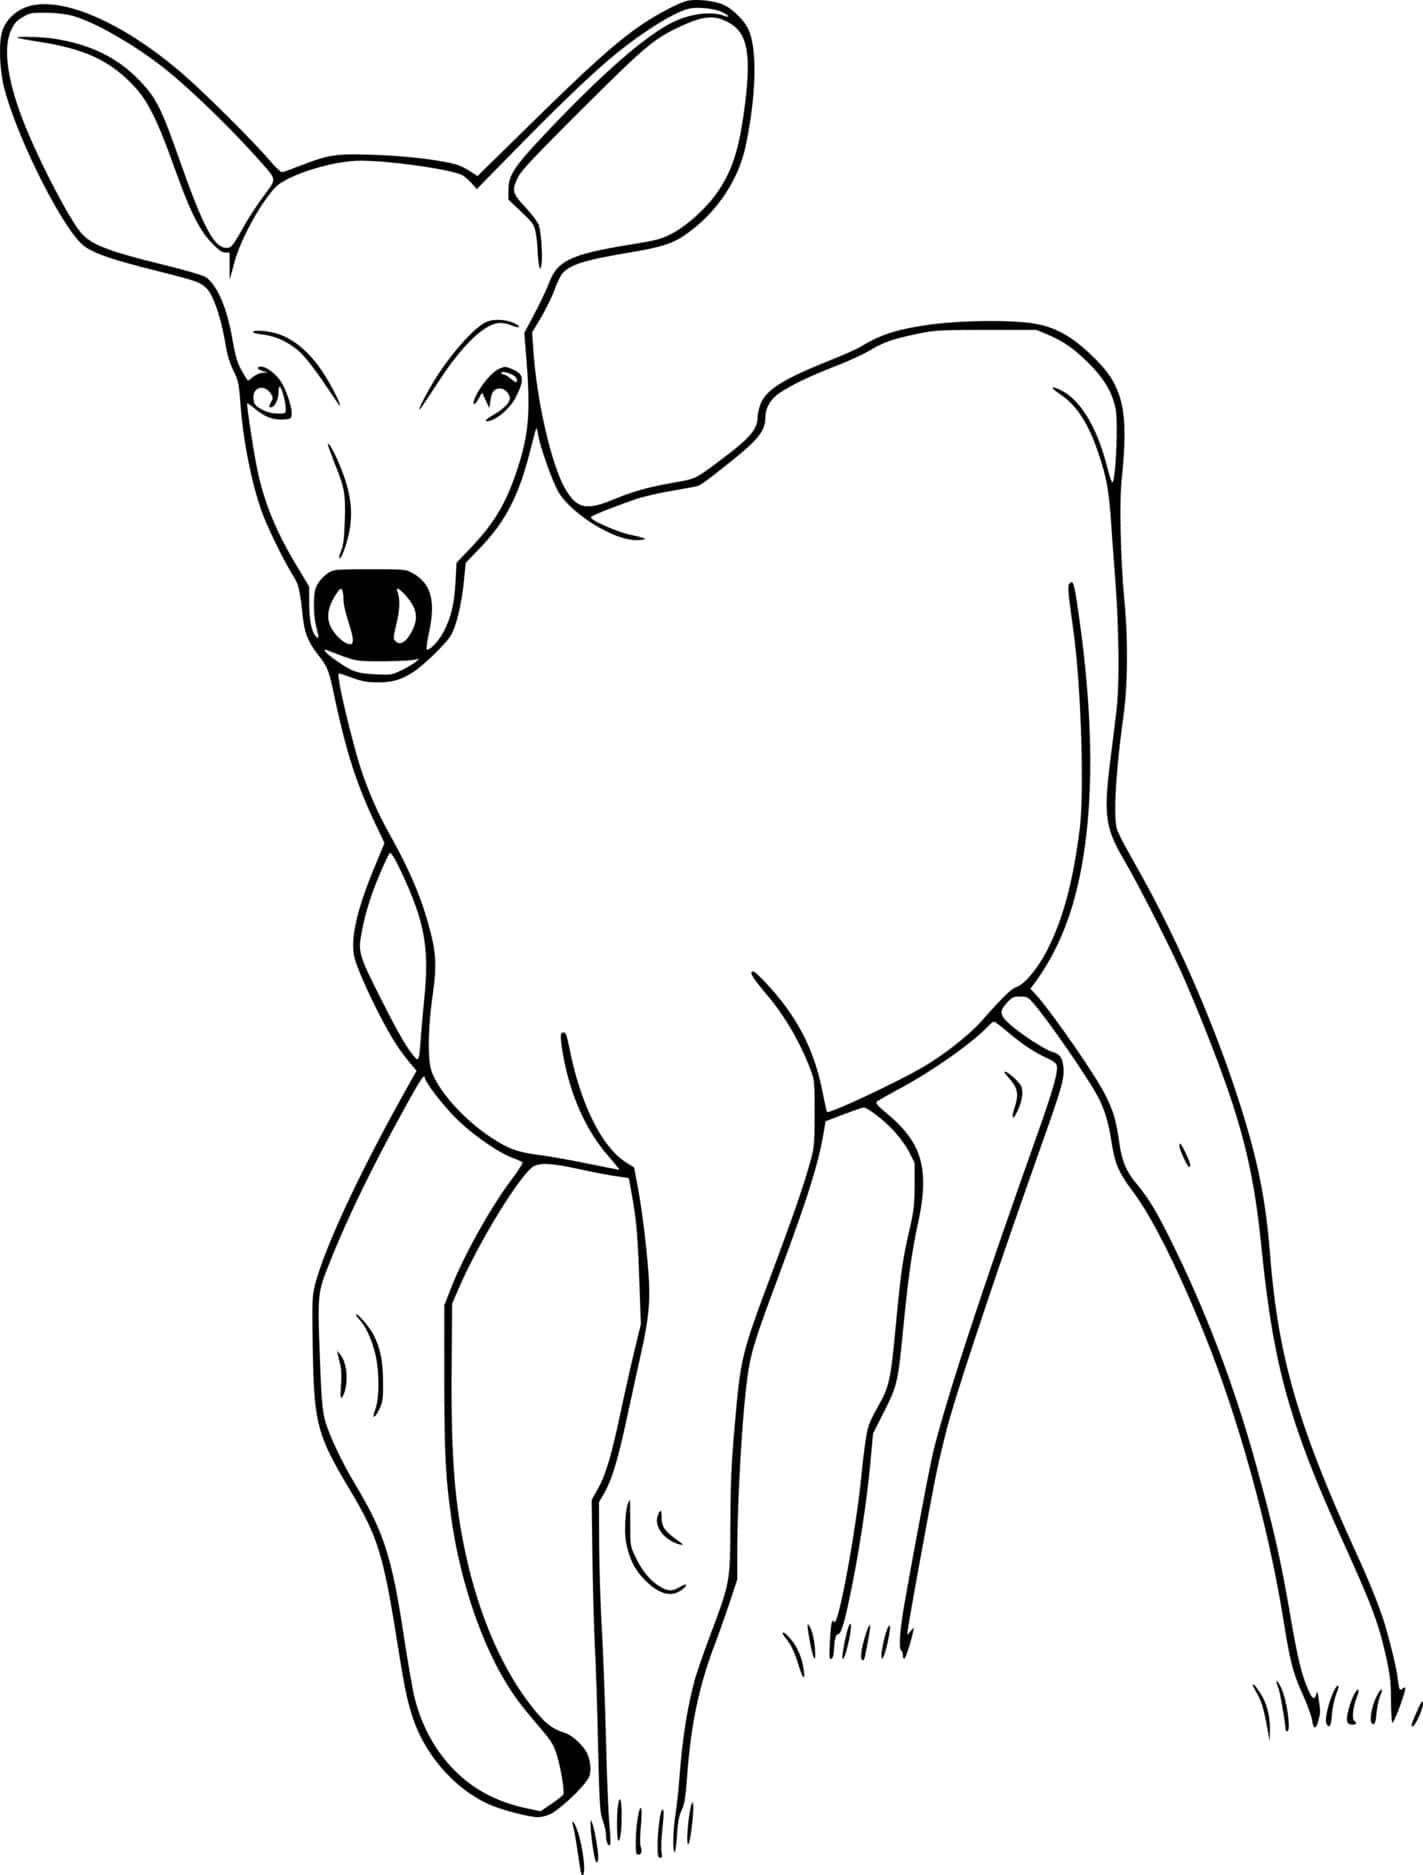 Easy Deer On The Grass Coloring Page